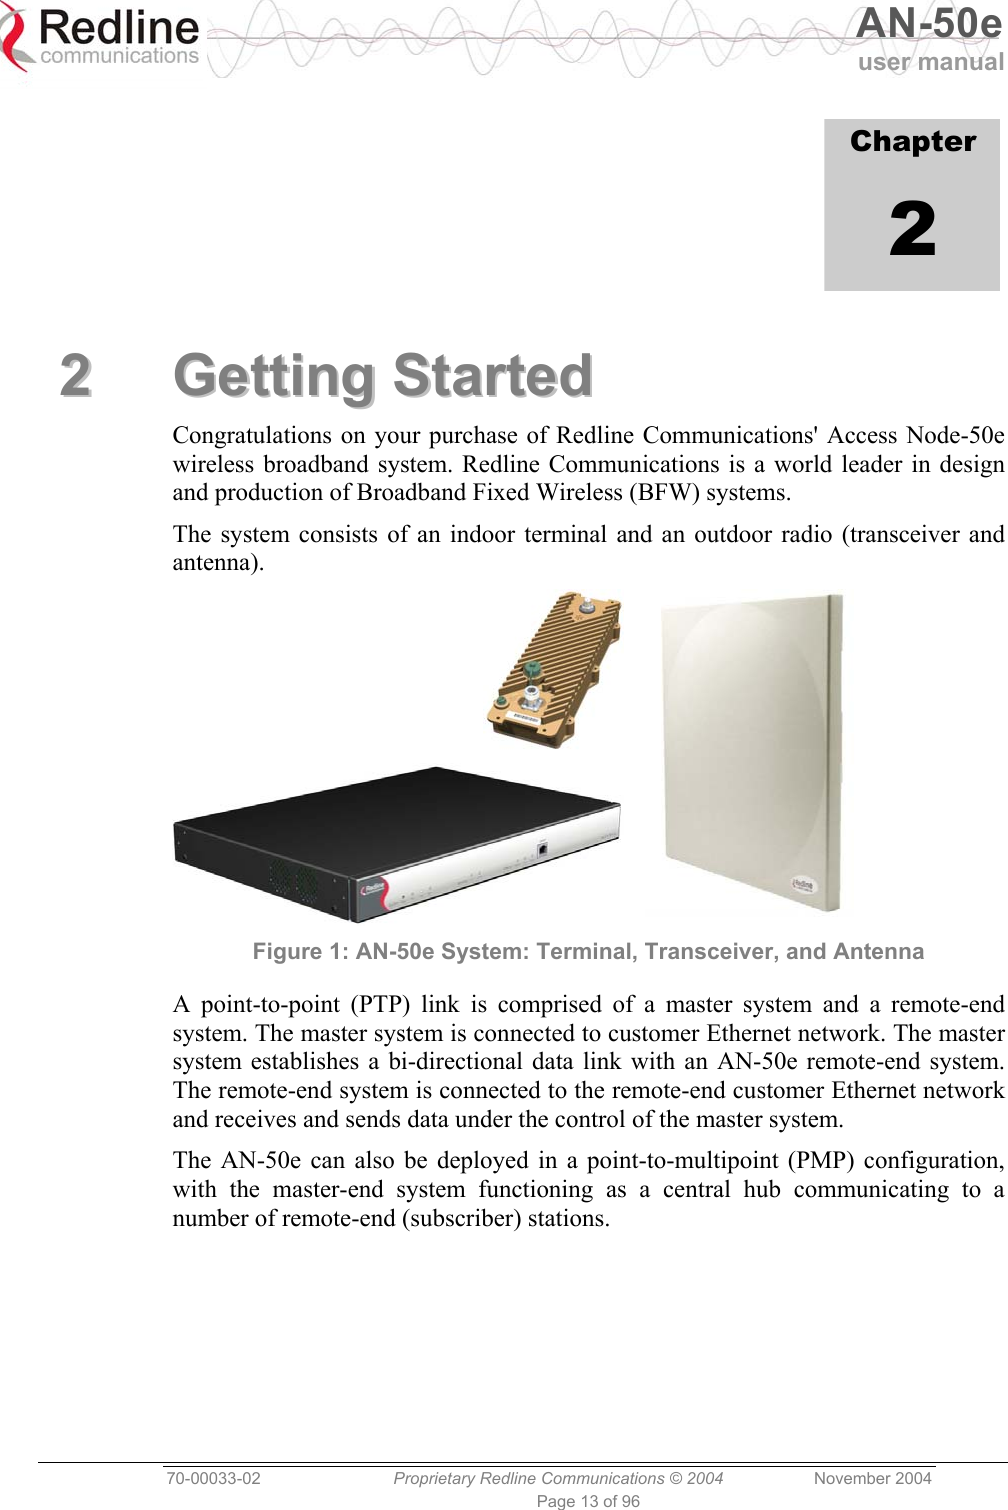   AN-50e user manual  70-00033-02  Proprietary Redline Communications © 2004 November 2004 Page 13 of 96             Chapter 2 22  GGeettttiinngg  SSttaarrtteedd  Congratulations on your purchase of Redline Communications&apos; Access Node-50e wireless broadband system. Redline Communications is a world leader in design and production of Broadband Fixed Wireless (BFW) systems. The system consists of an indoor terminal and an outdoor radio (transceiver and antenna).  Figure 1: AN-50e System: Terminal, Transceiver, and Antenna A point-to-point (PTP) link is comprised of a master system and a remote-end system. The master system is connected to customer Ethernet network. The master system establishes a bi-directional data link with an AN-50e remote-end system. The remote-end system is connected to the remote-end customer Ethernet network and receives and sends data under the control of the master system. The AN-50e can also be deployed in a point-to-multipoint (PMP) configuration, with the master-end system functioning as a central hub communicating to a number of remote-end (subscriber) stations.  